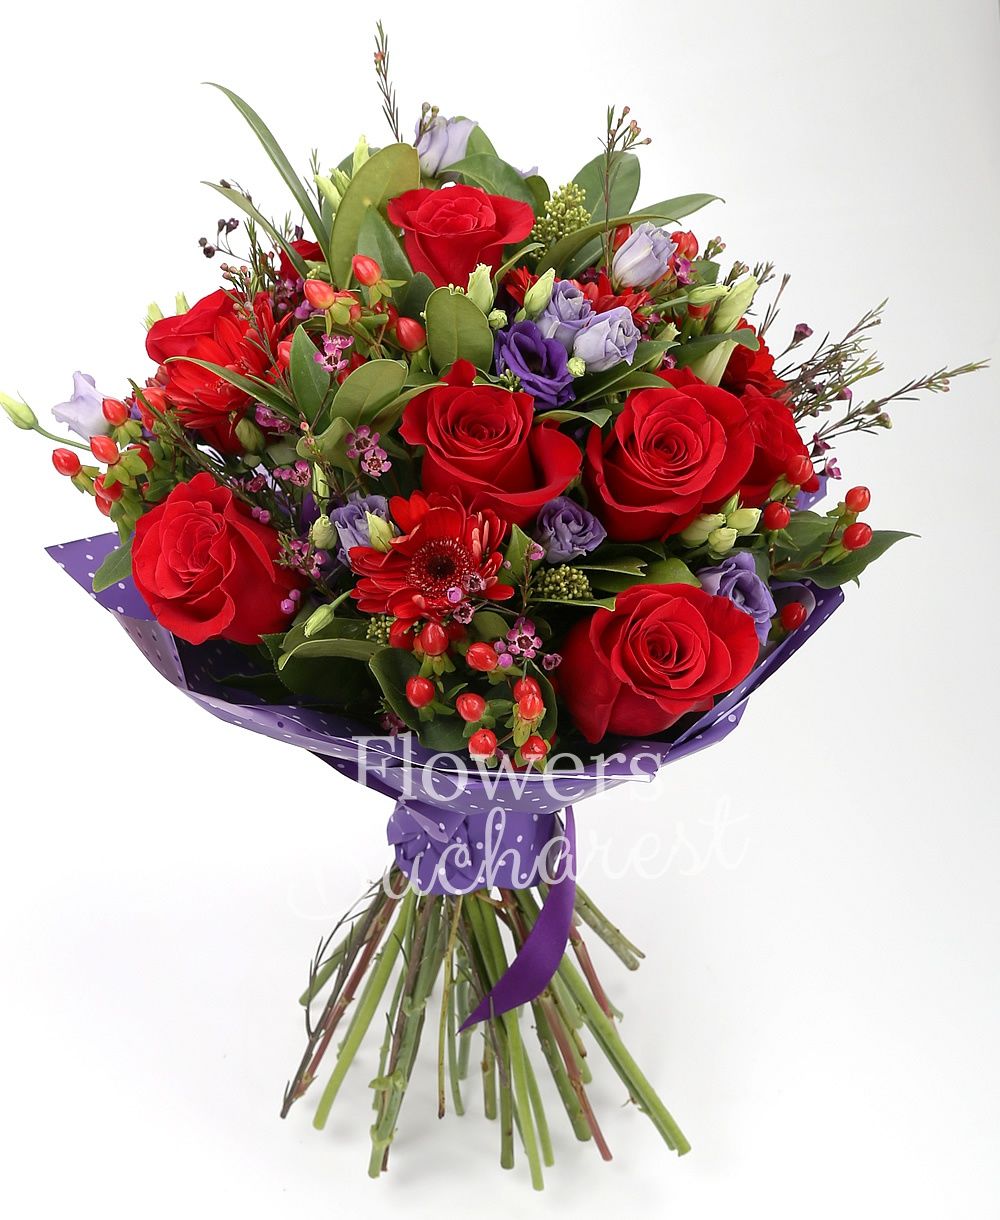 9 red roses, 9 red gerbera, 7 mauve lisianthus, 10 red hypericum, 5 waxflower, 5 schimia, greenery